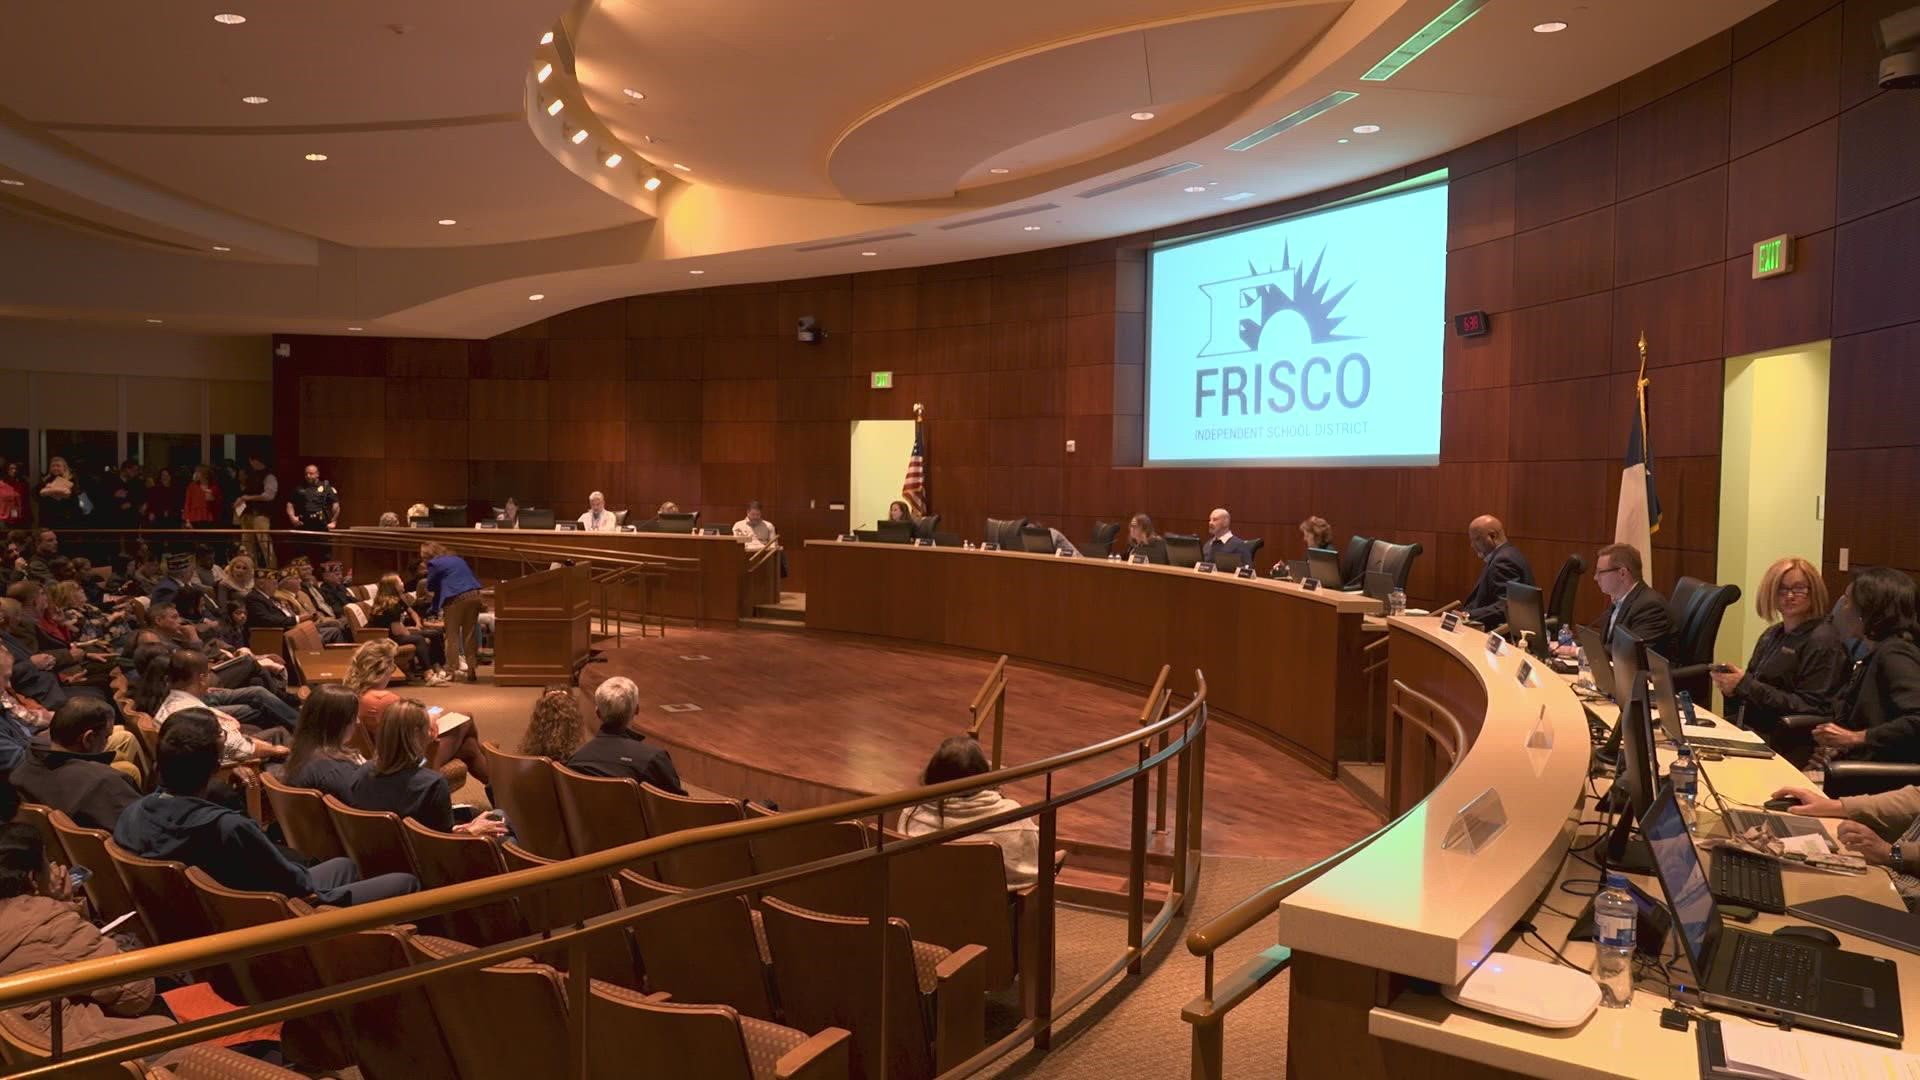 Frisco ISD board members voted to approve a policy that would make students use bathrooms throughout the district according to the gender assigned at birth.